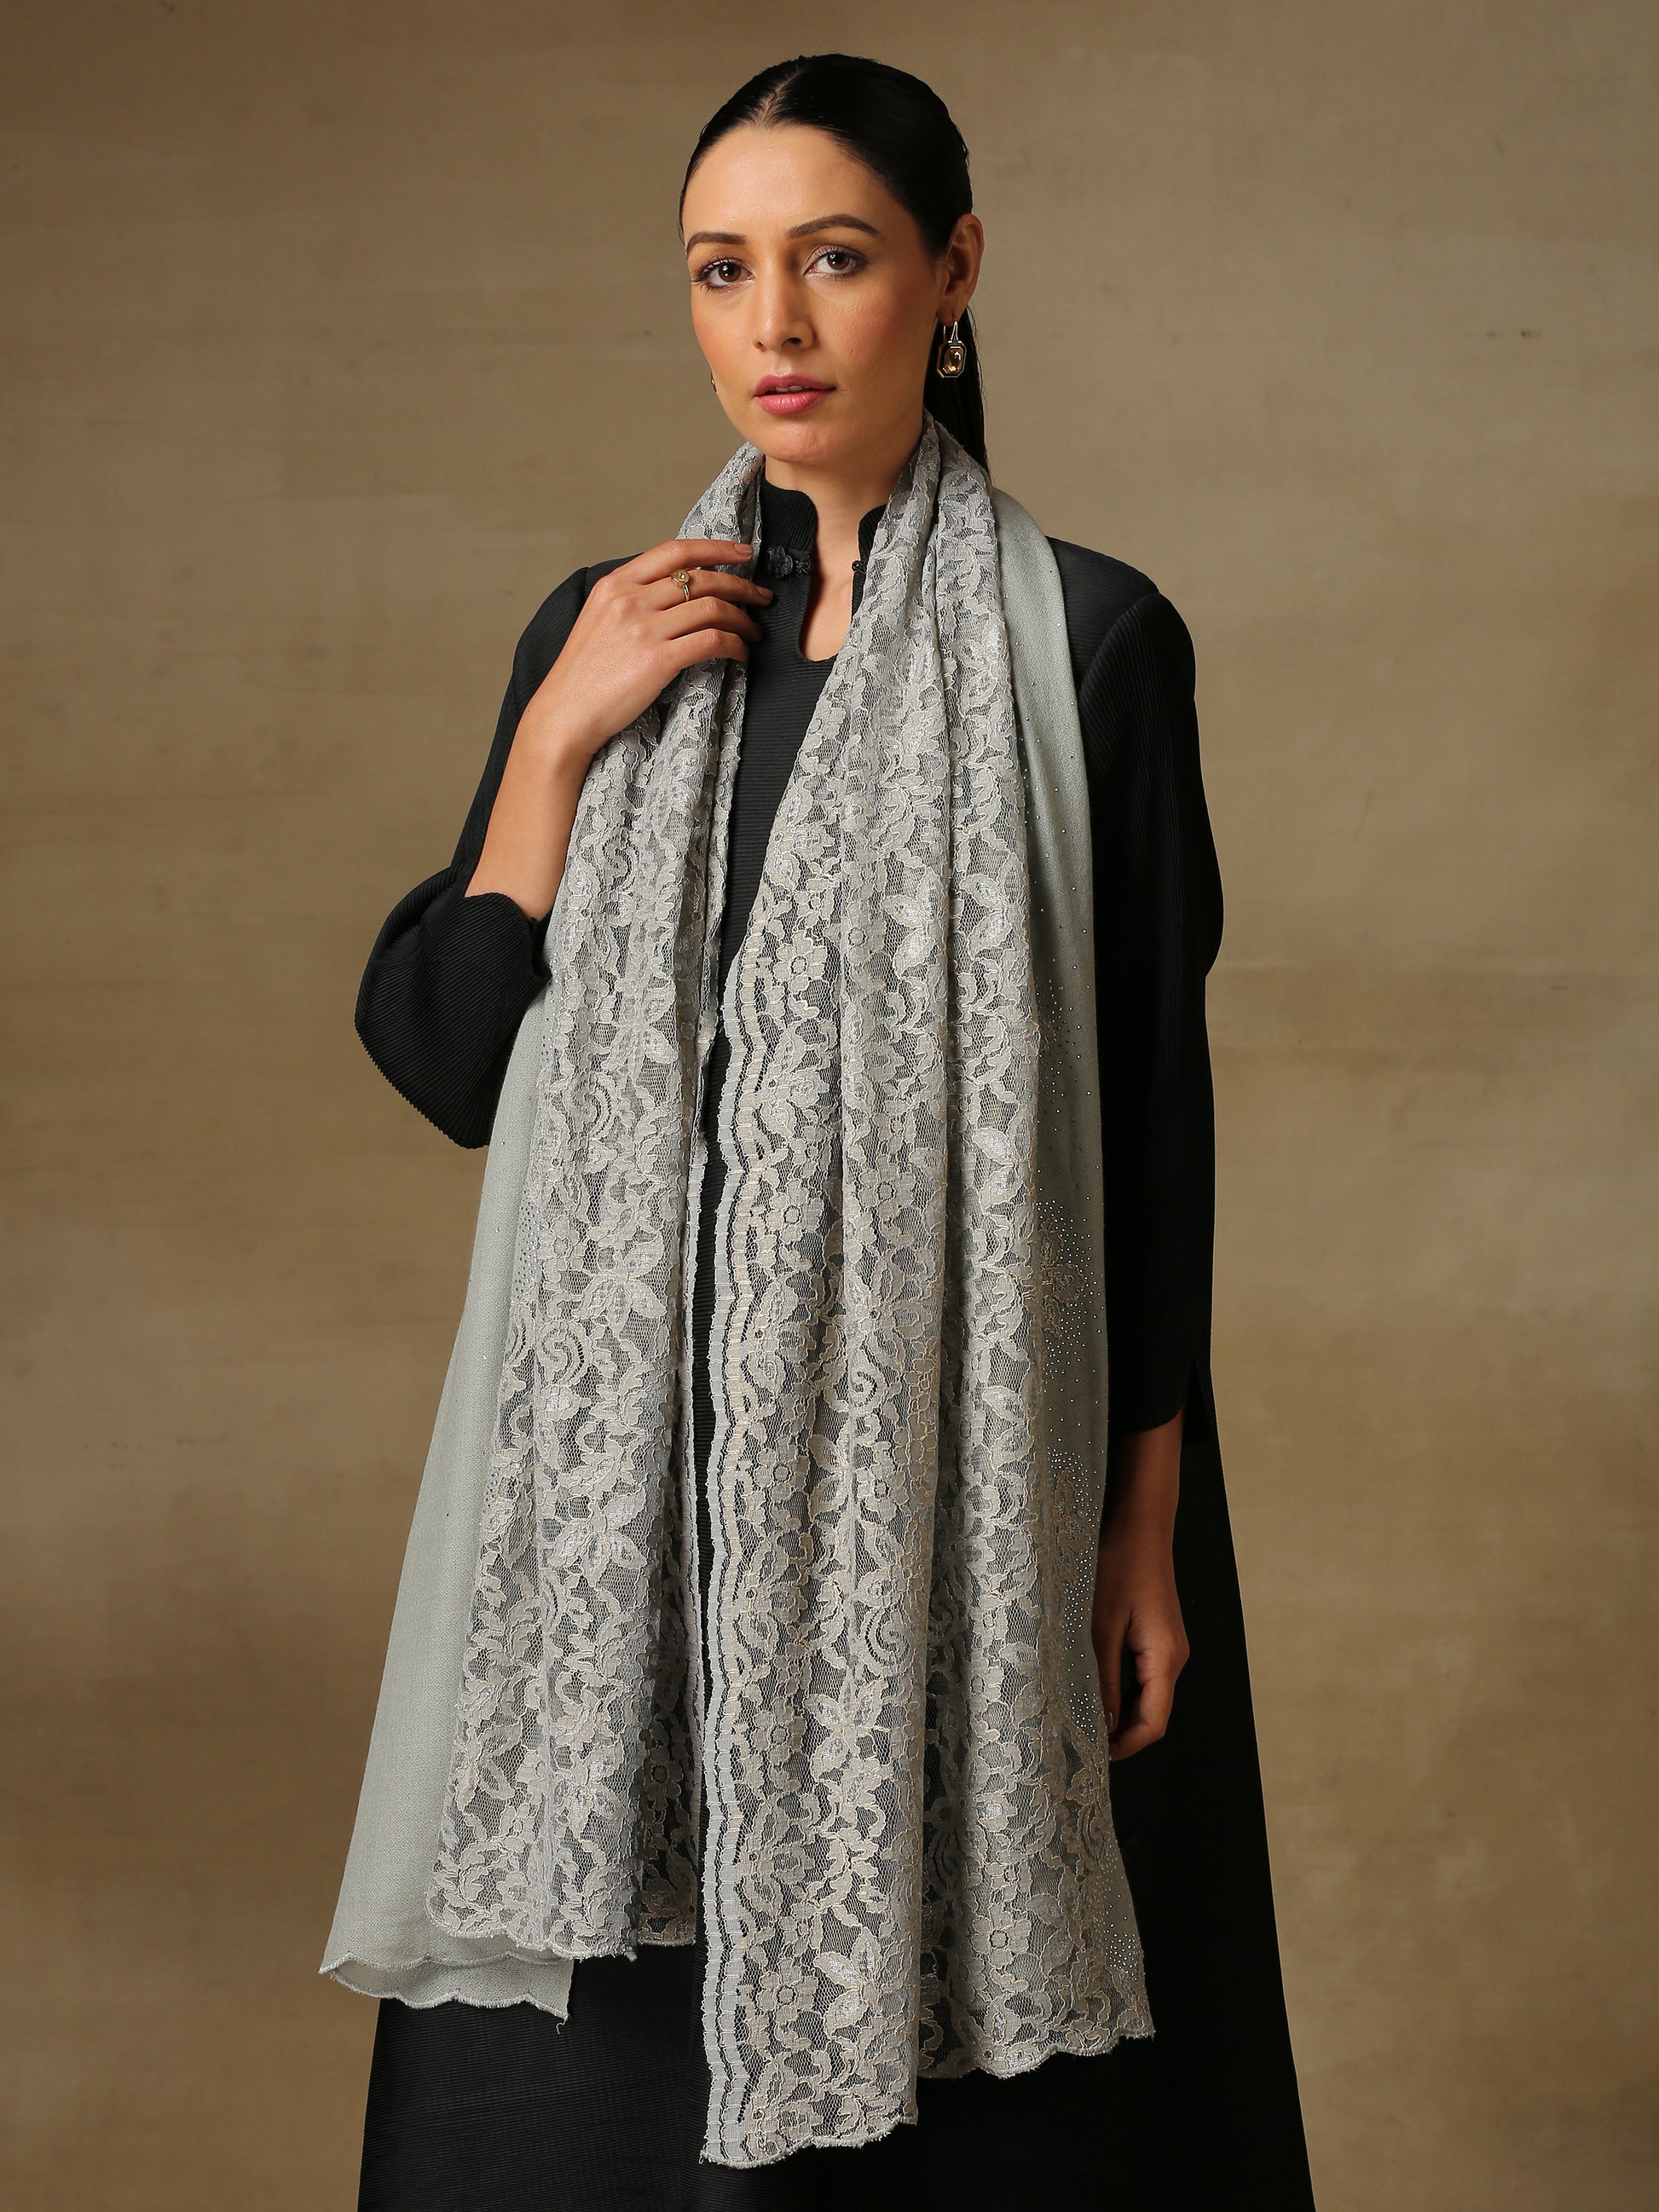 Model is wearing a Celestial Chantilly Zaywar stole from Shaza in seal gray.